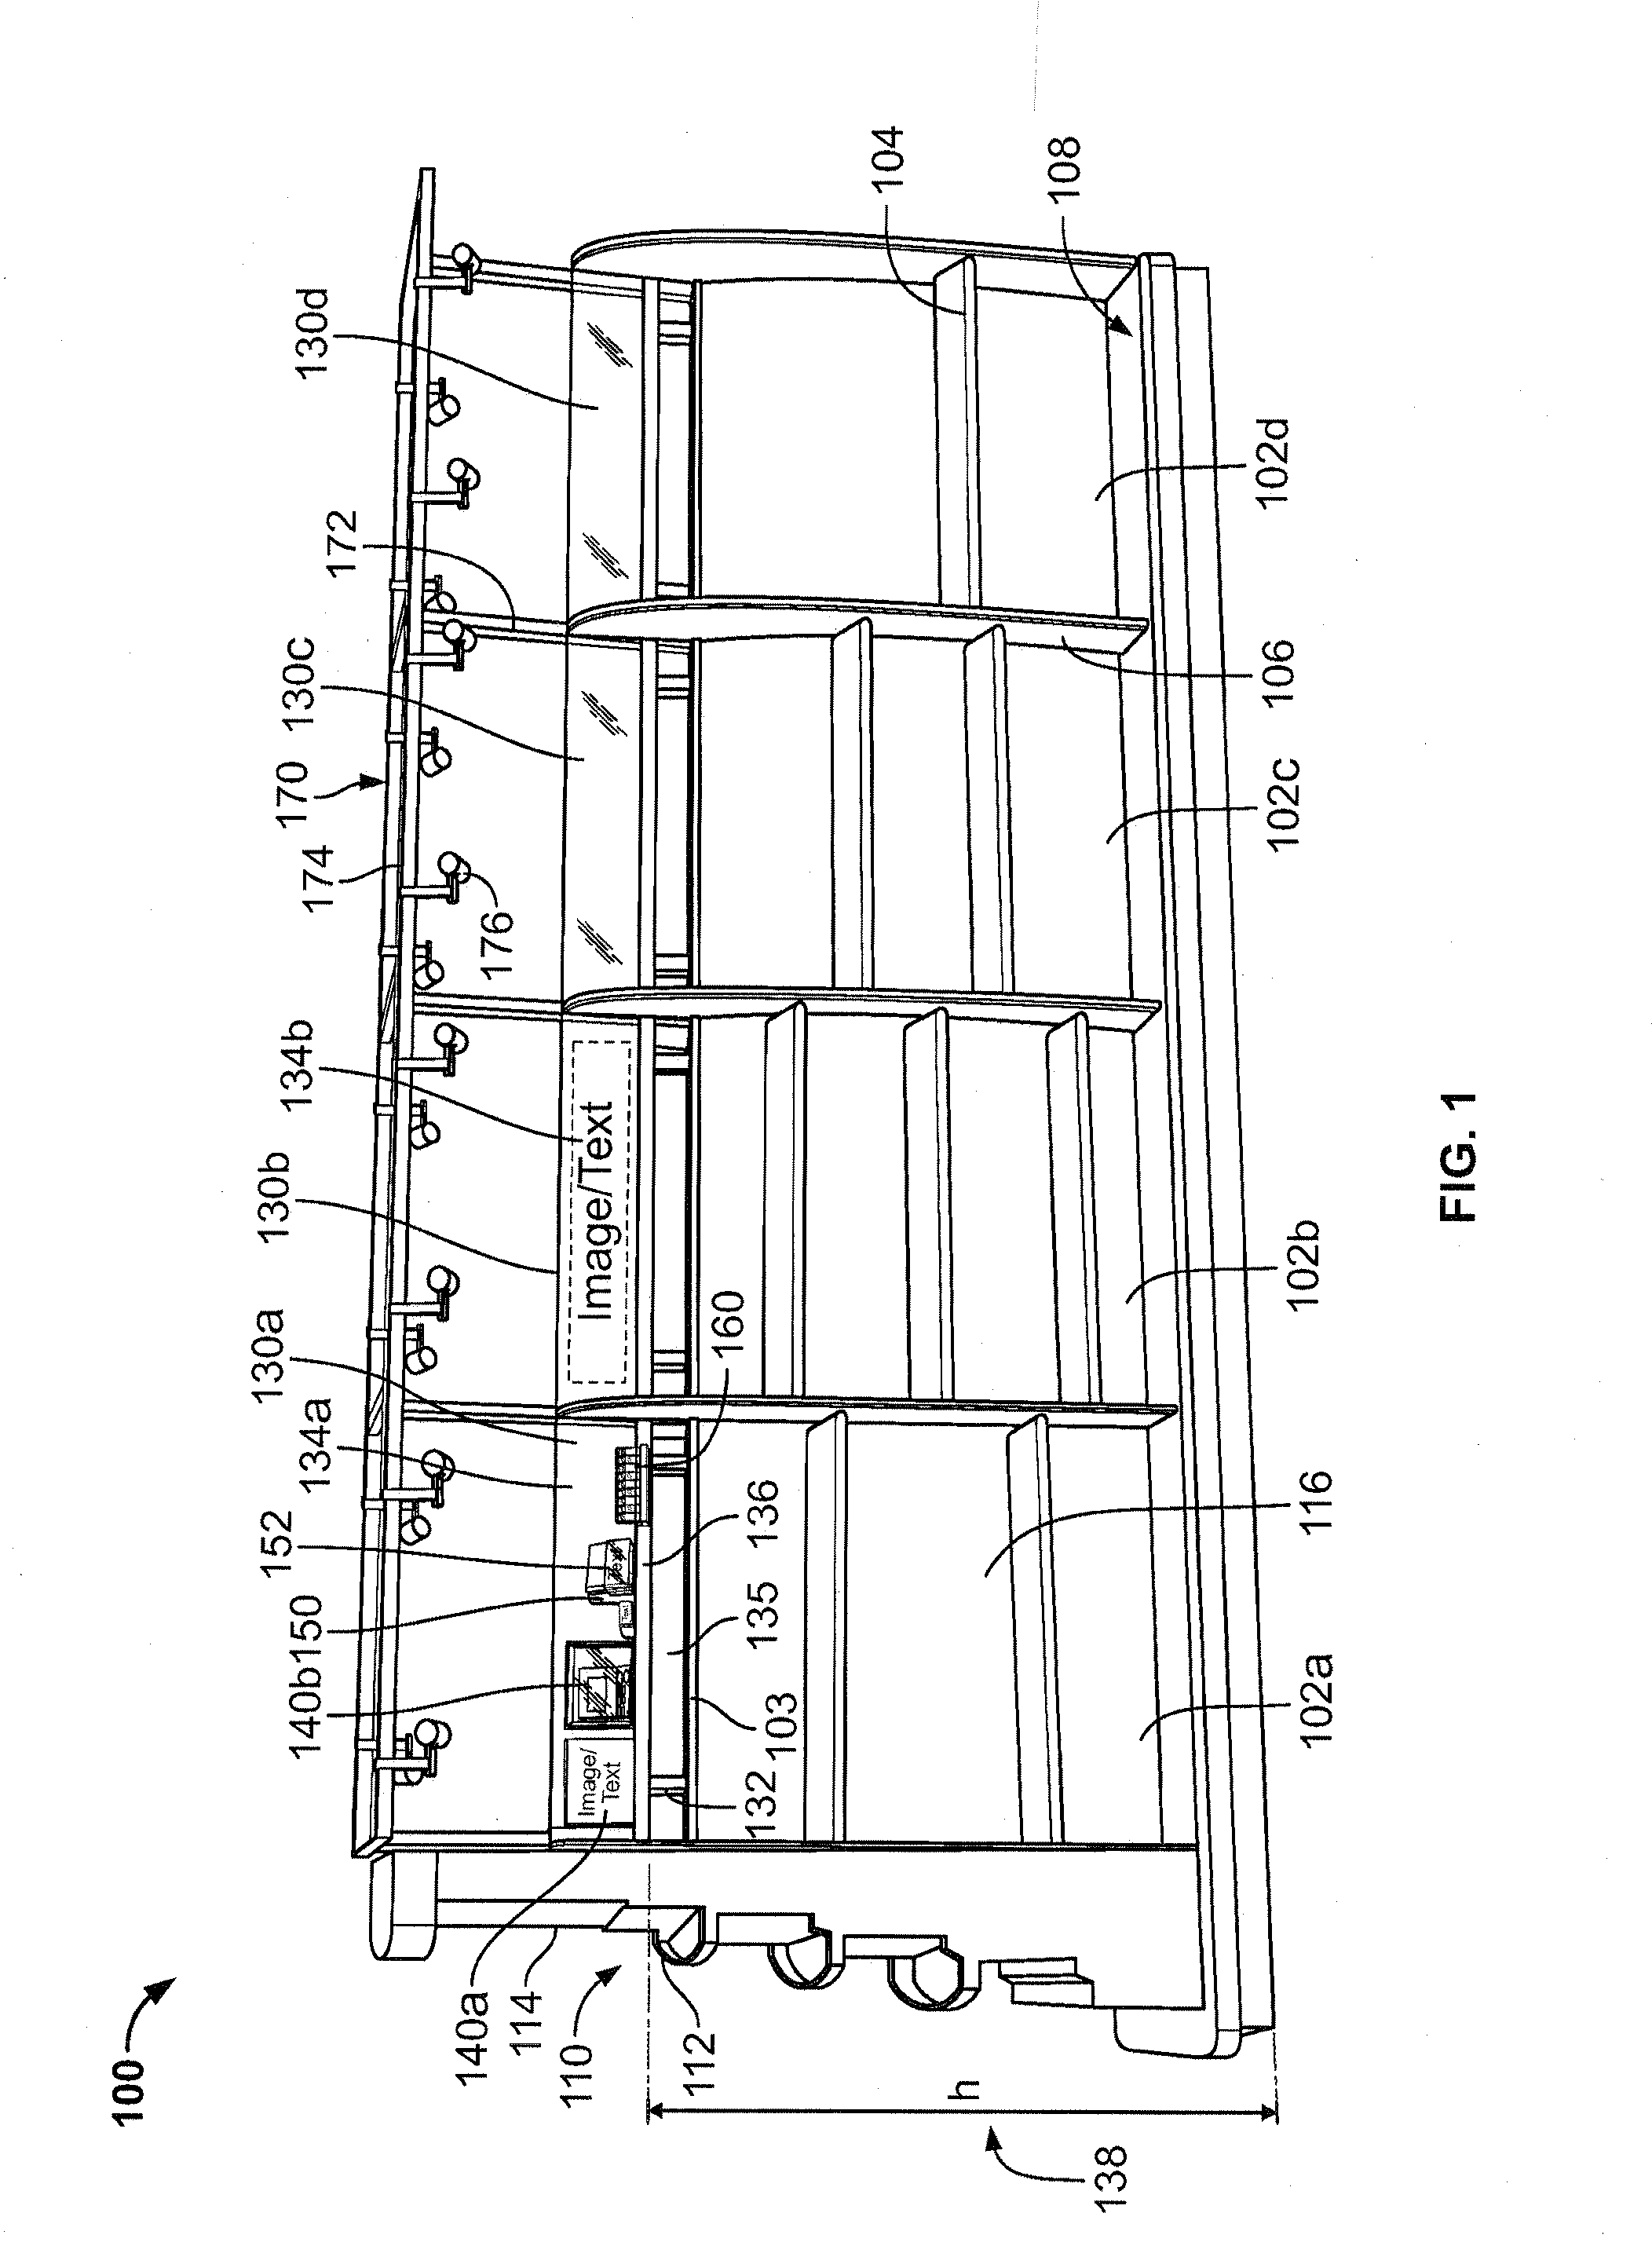 Display Apparatus and Method